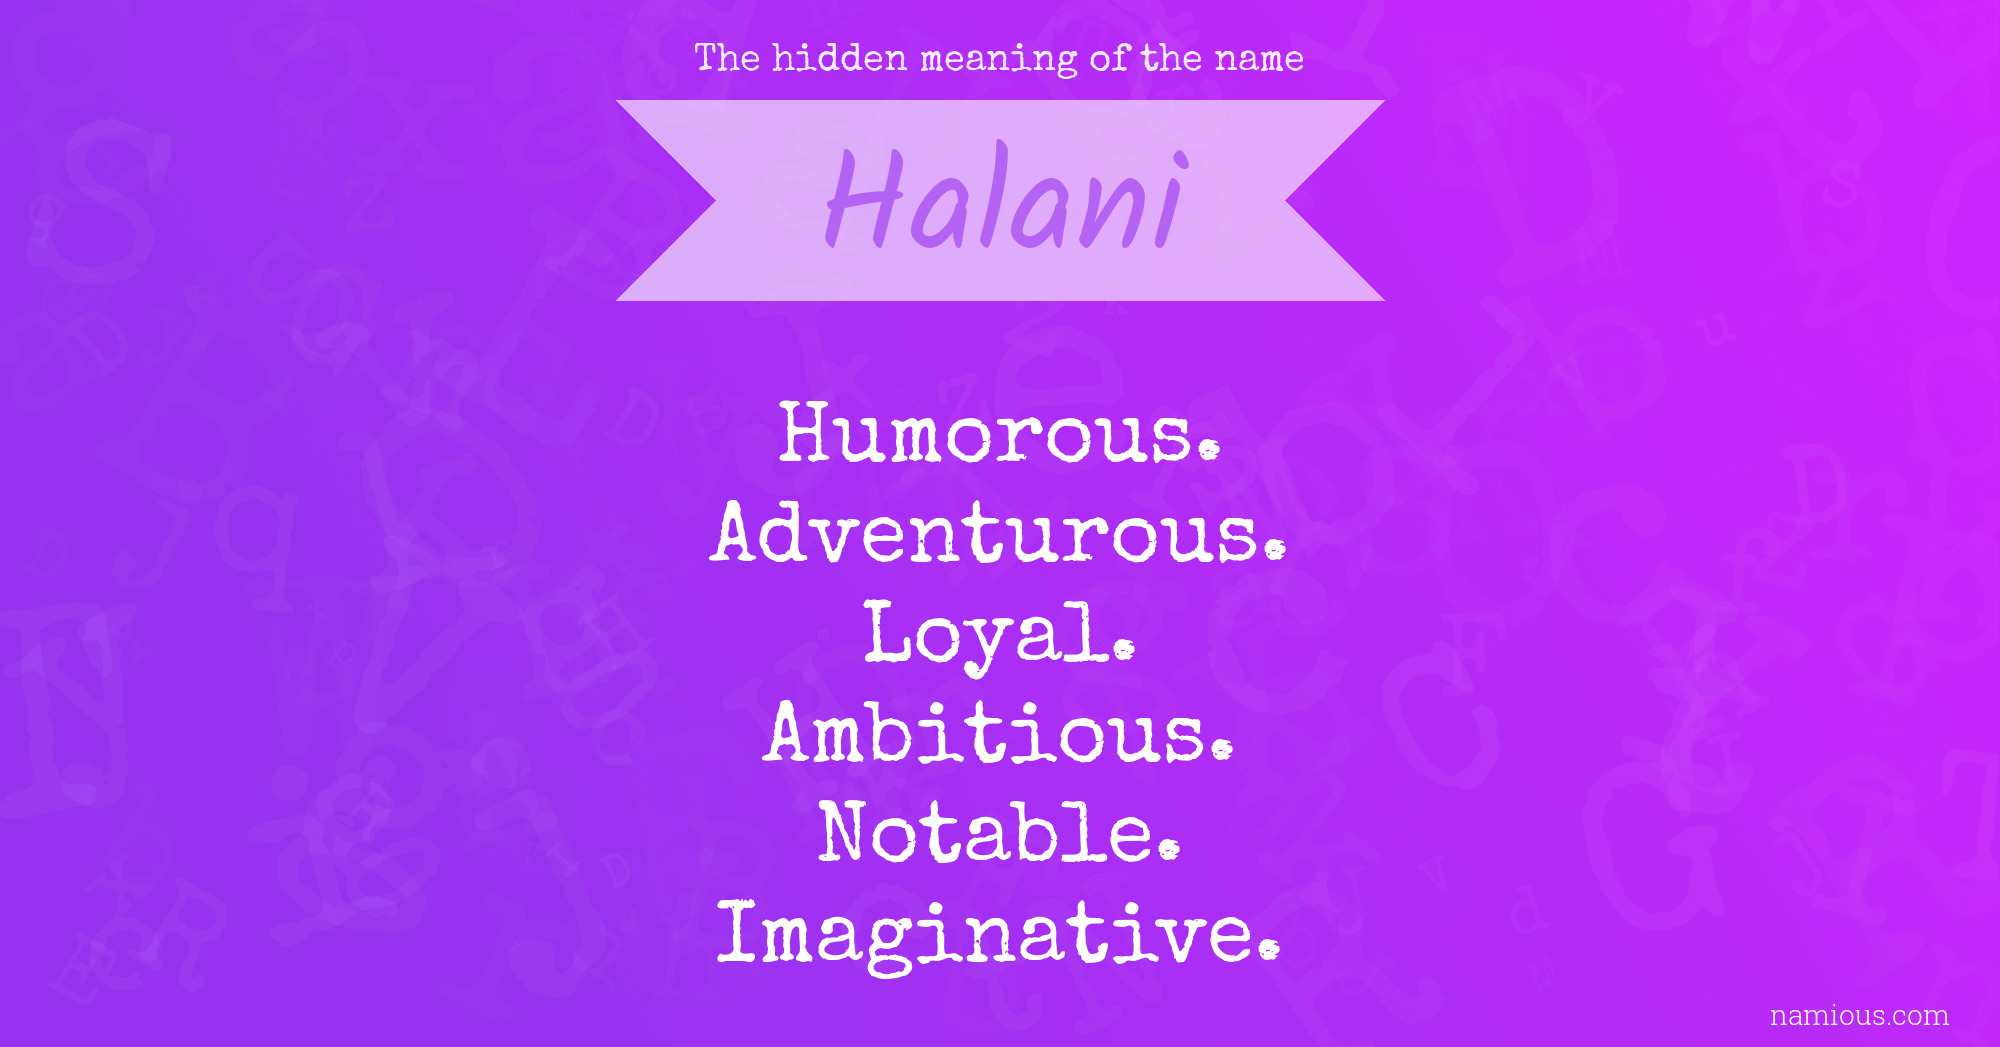 The hidden meaning of the name Halani